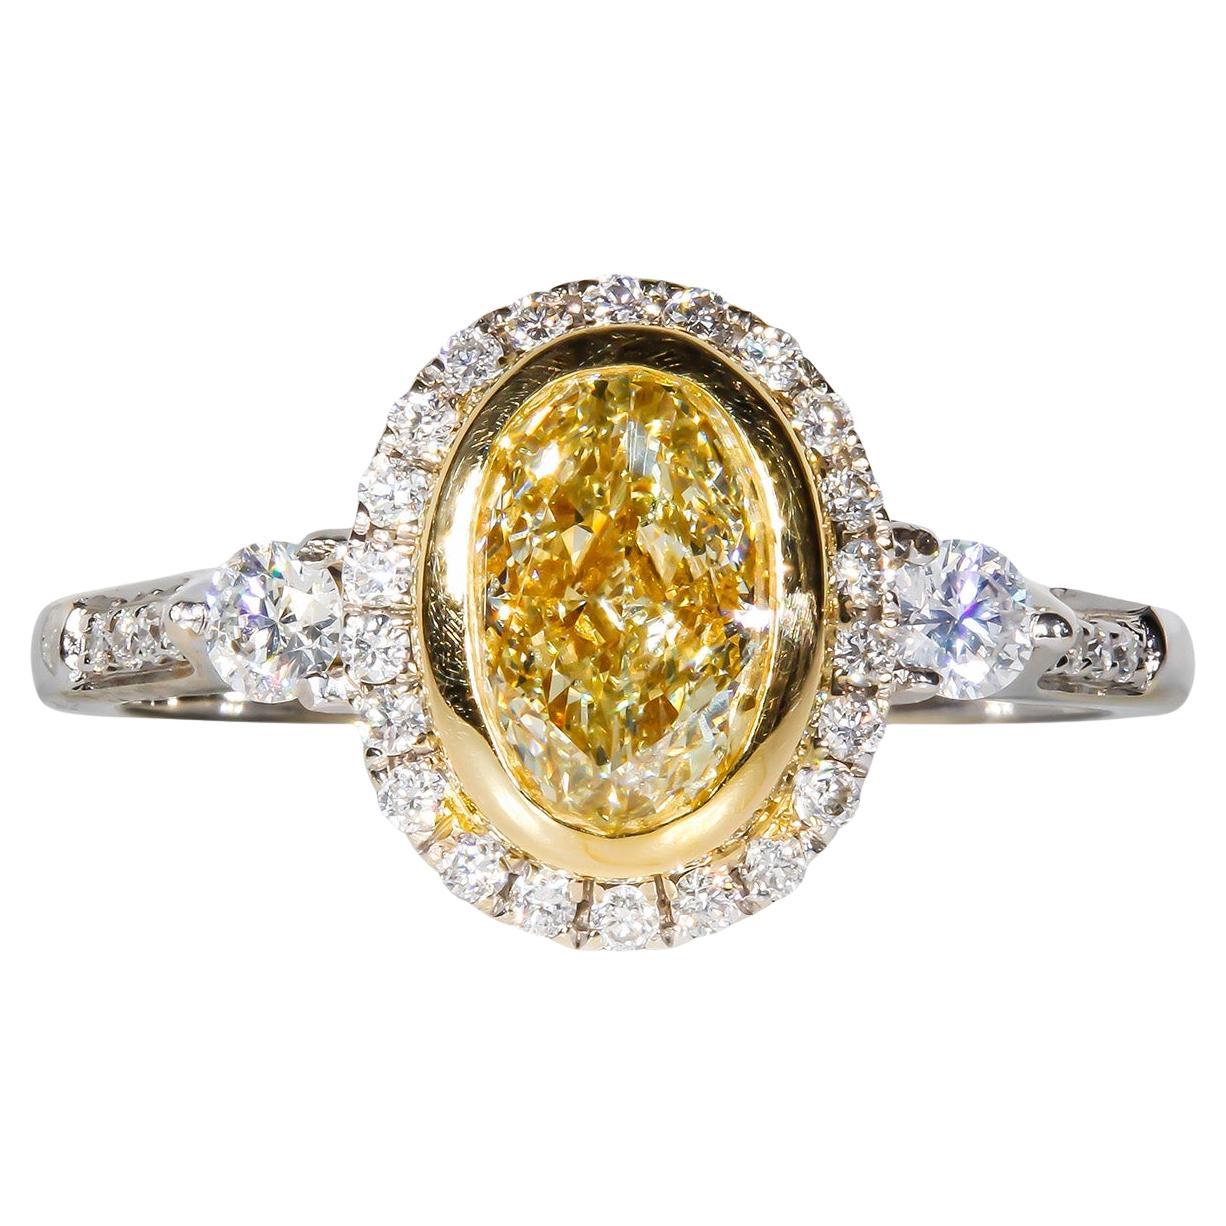 Halo Ring in 18K WG with Fancy Light Yellow Oval Diamond Center. D1.36ct.t.w.